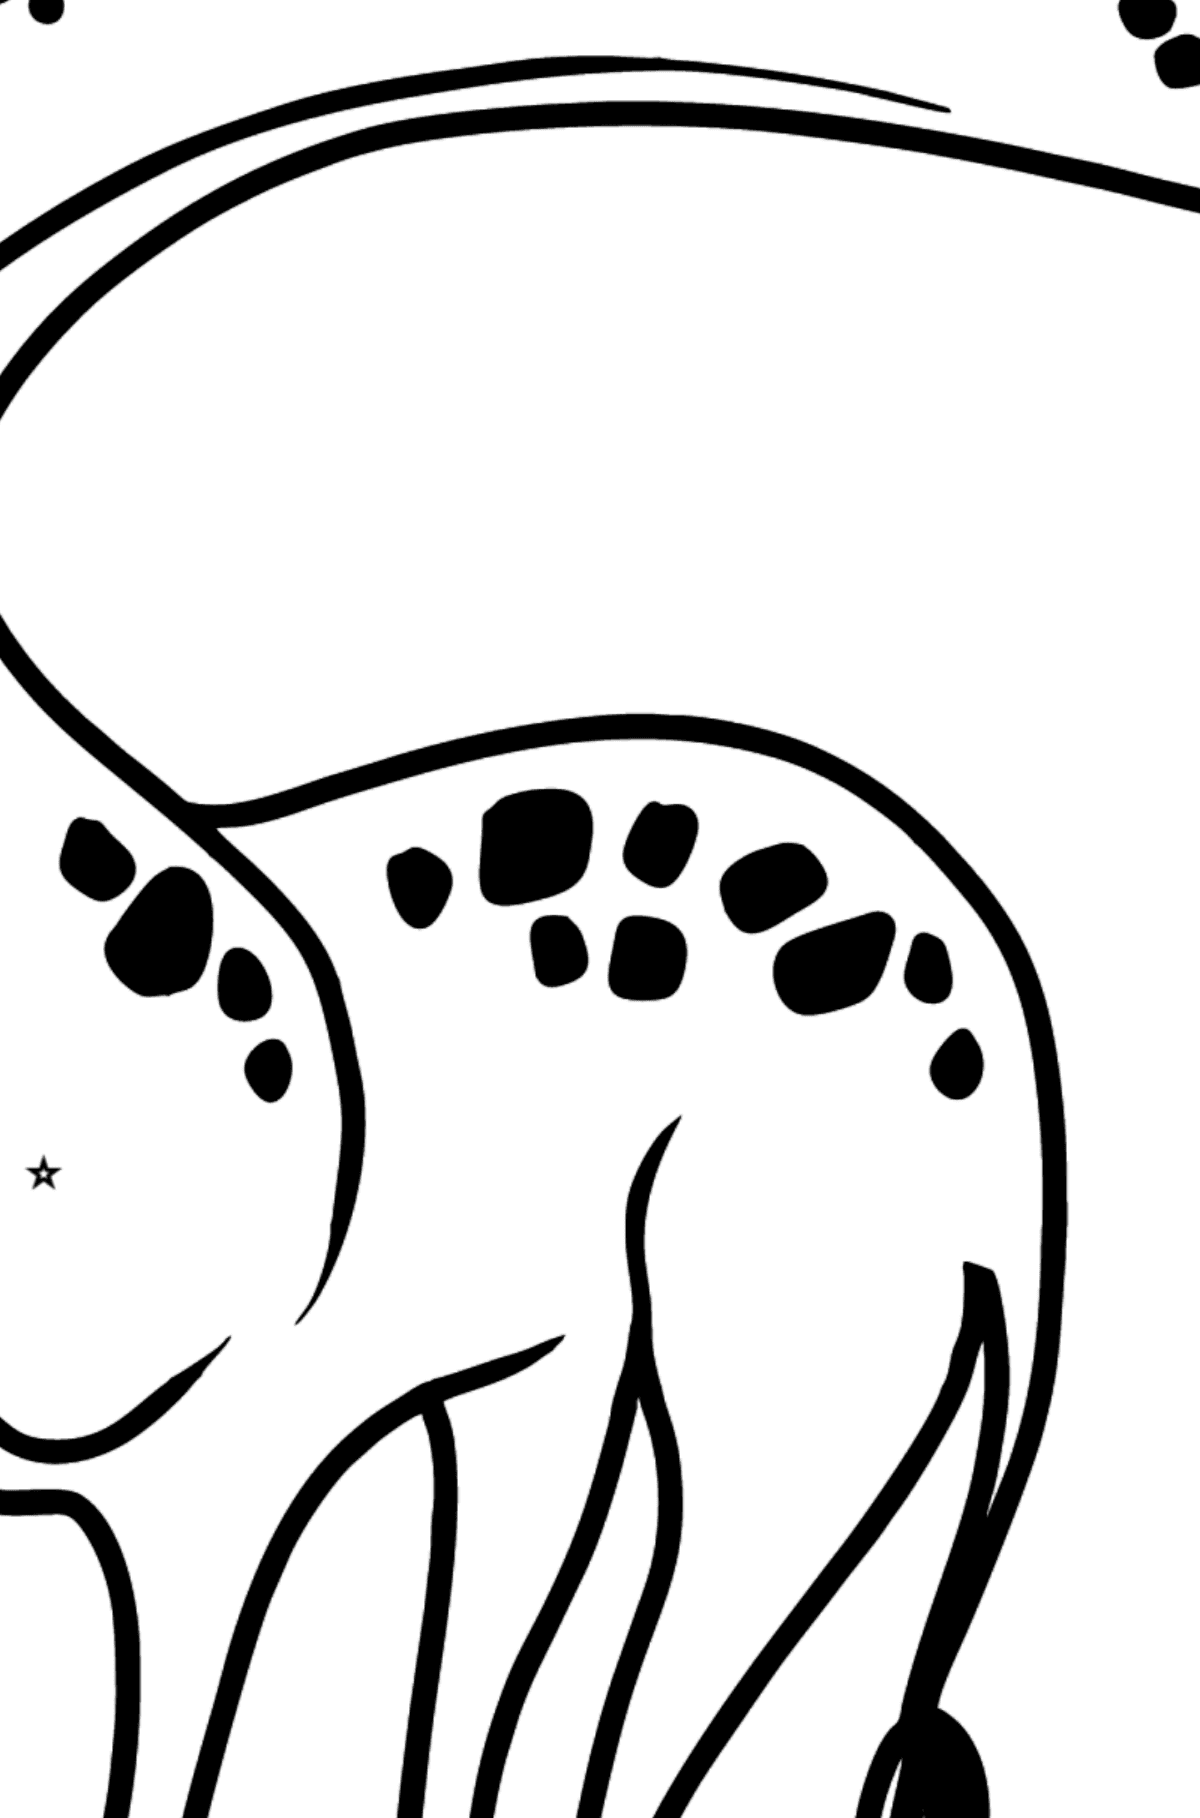 Giraffe coloring page - Coloring by Geometric Shapes for Kids